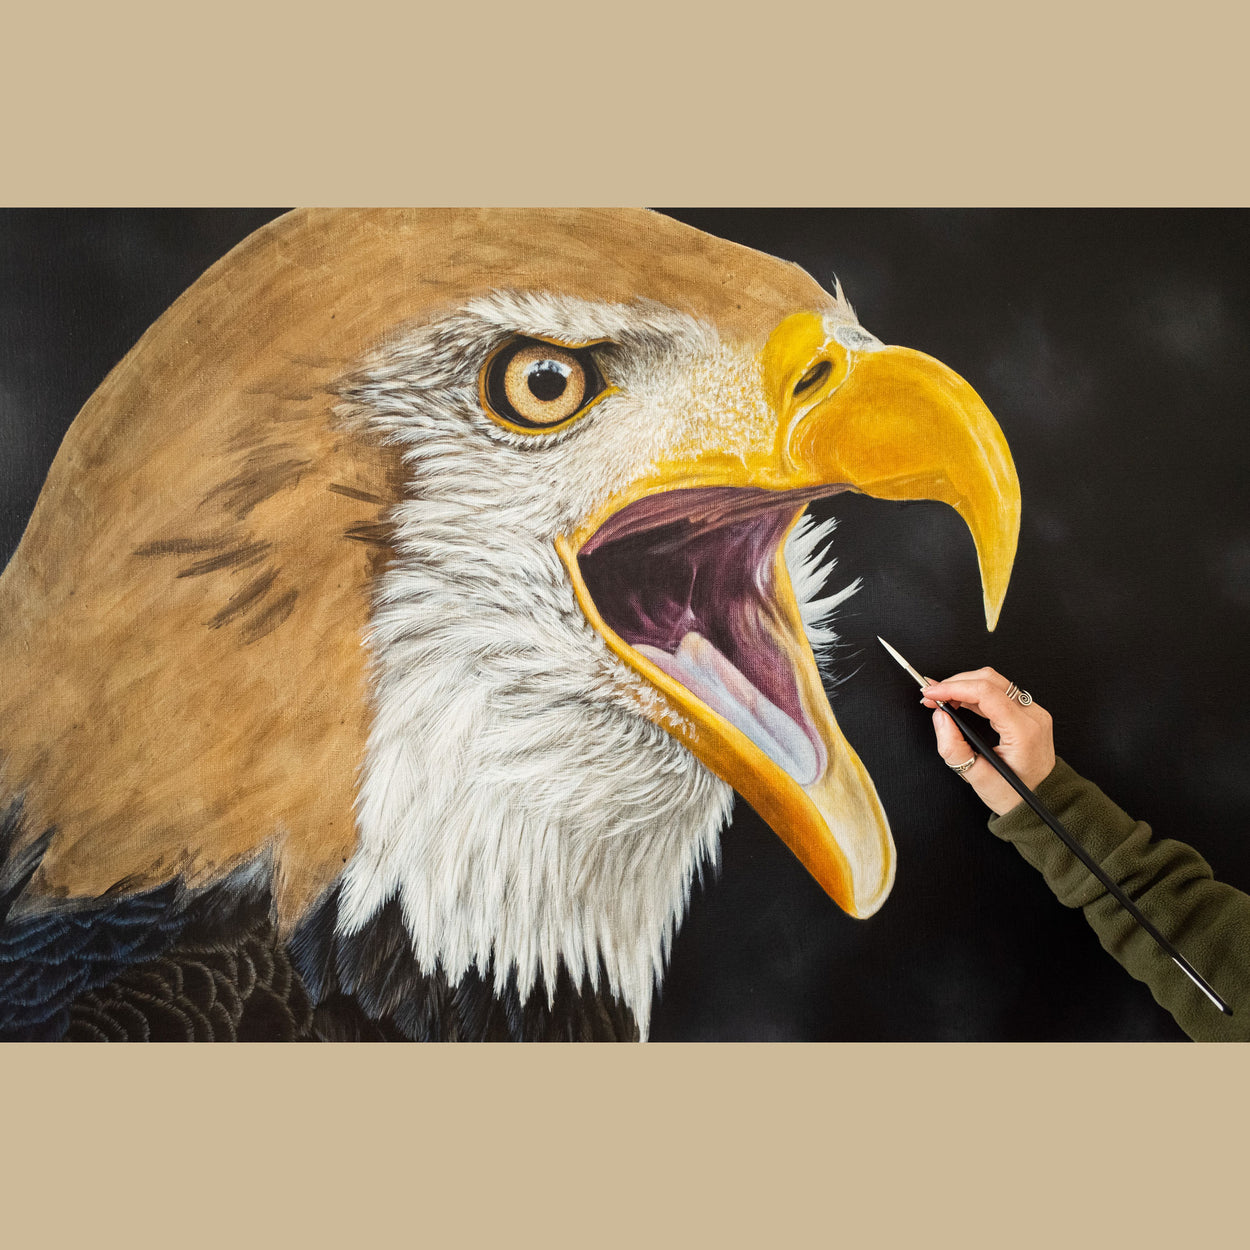 Bald Eagle painting in progress - by Jill Dimond